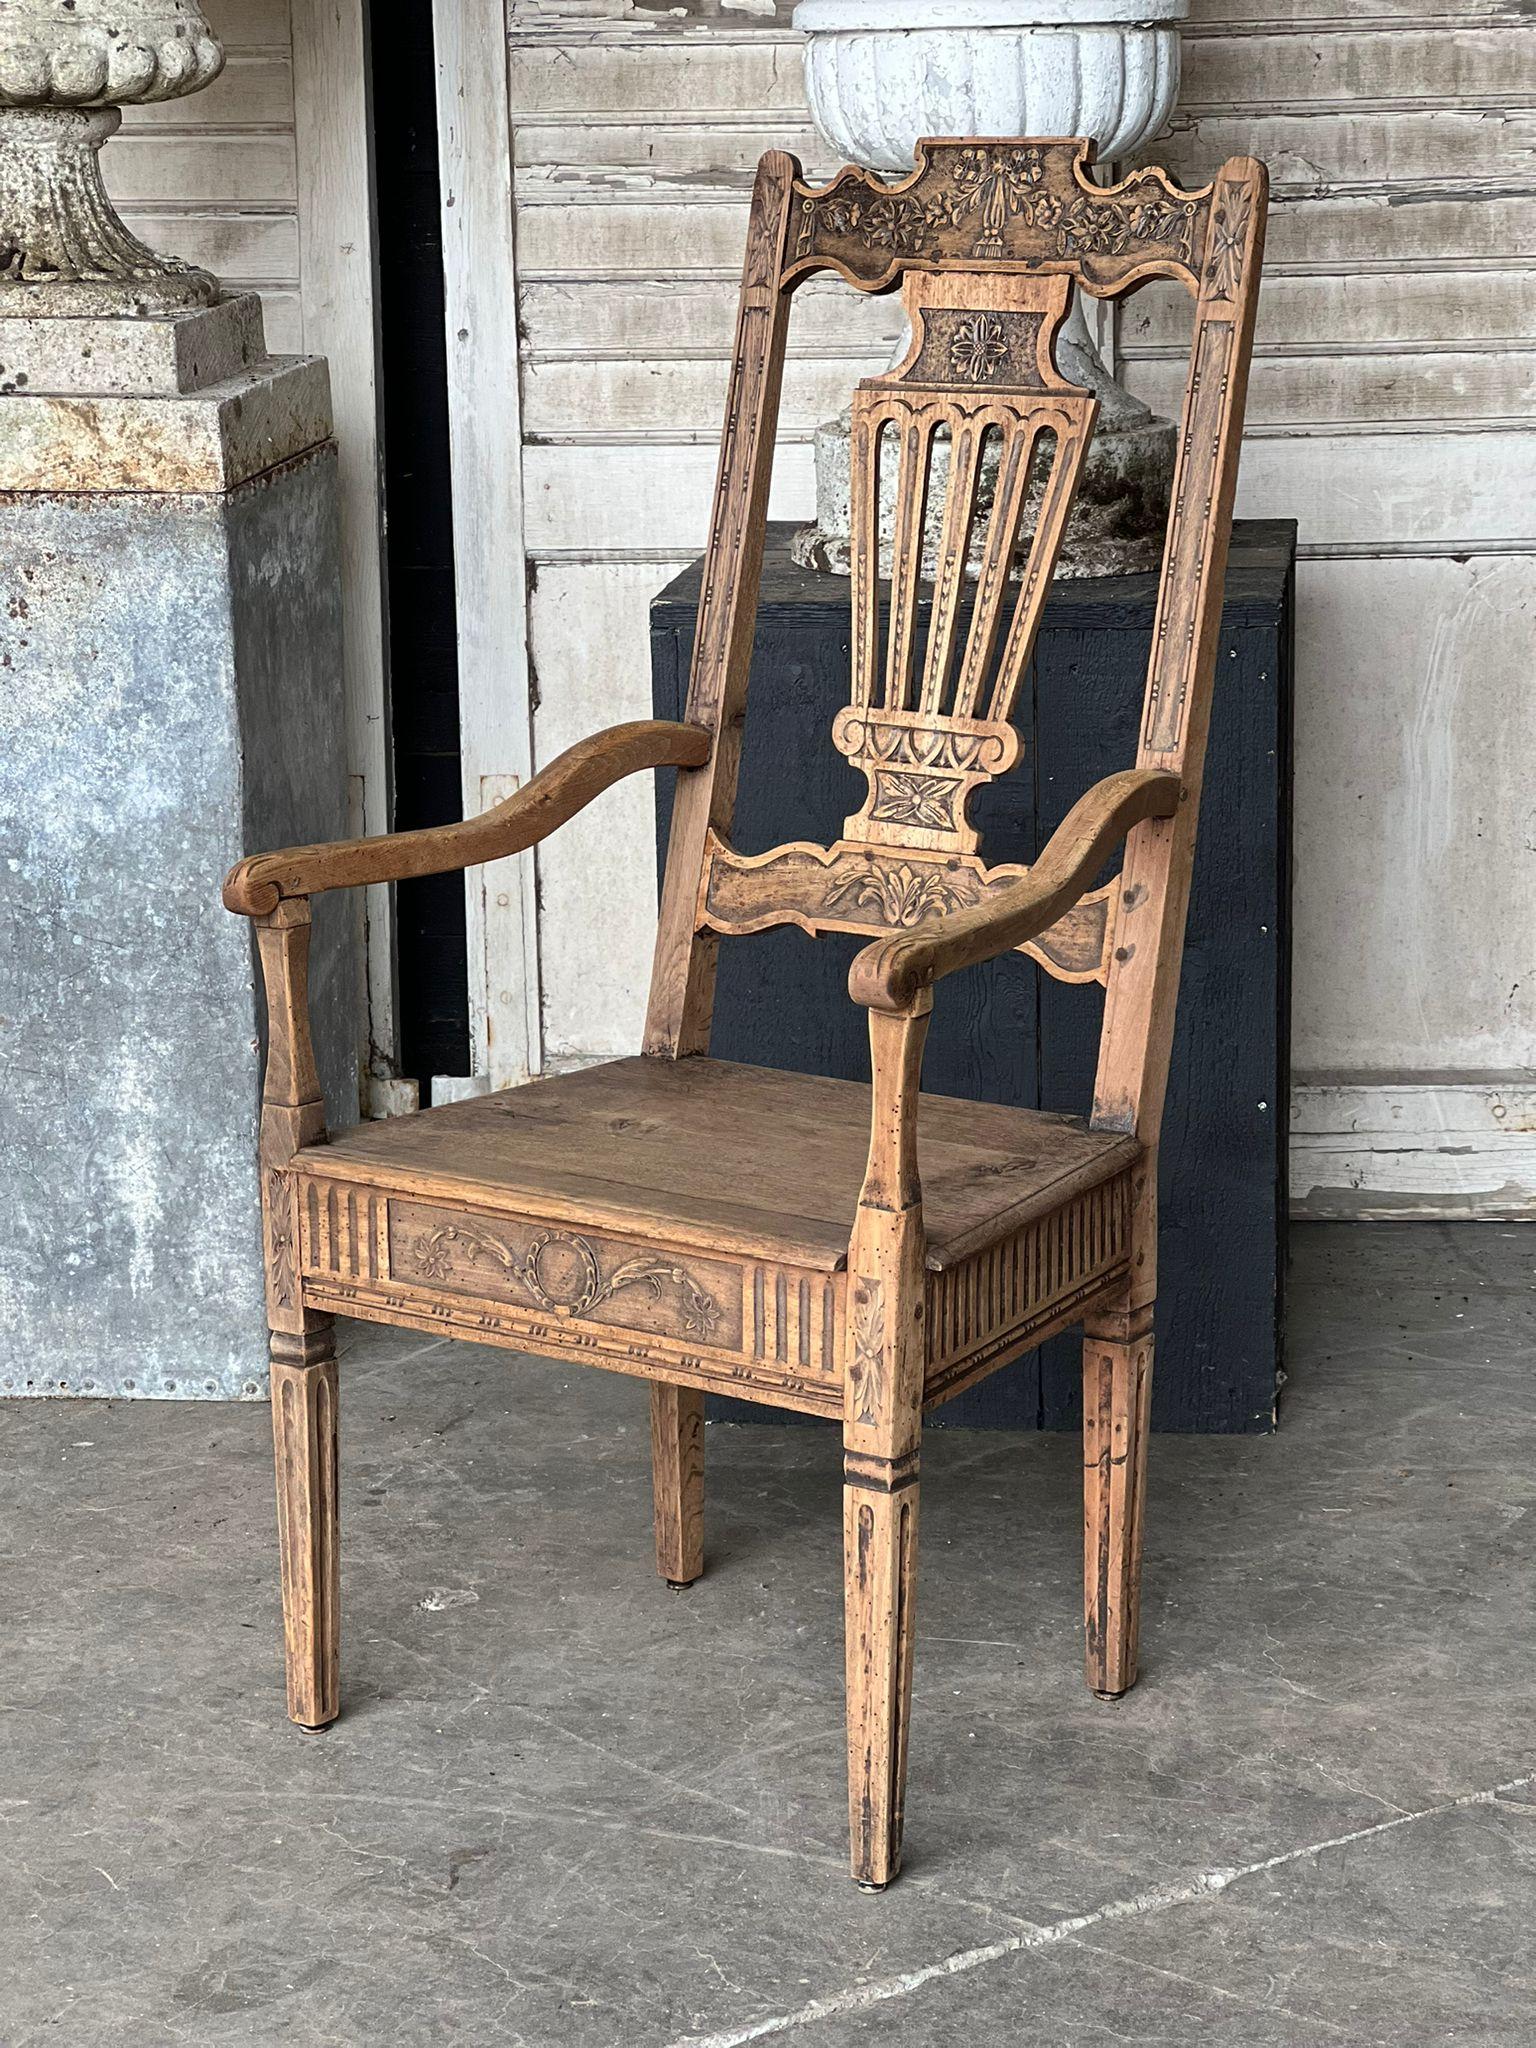 A lovely early French armchair. Dating to the early 19th century and made from Oak which we have bleached for a lighter look. Great pegged construction and carved decoration. The chair is strong and sturdy and a nice look.
This rare chair is in